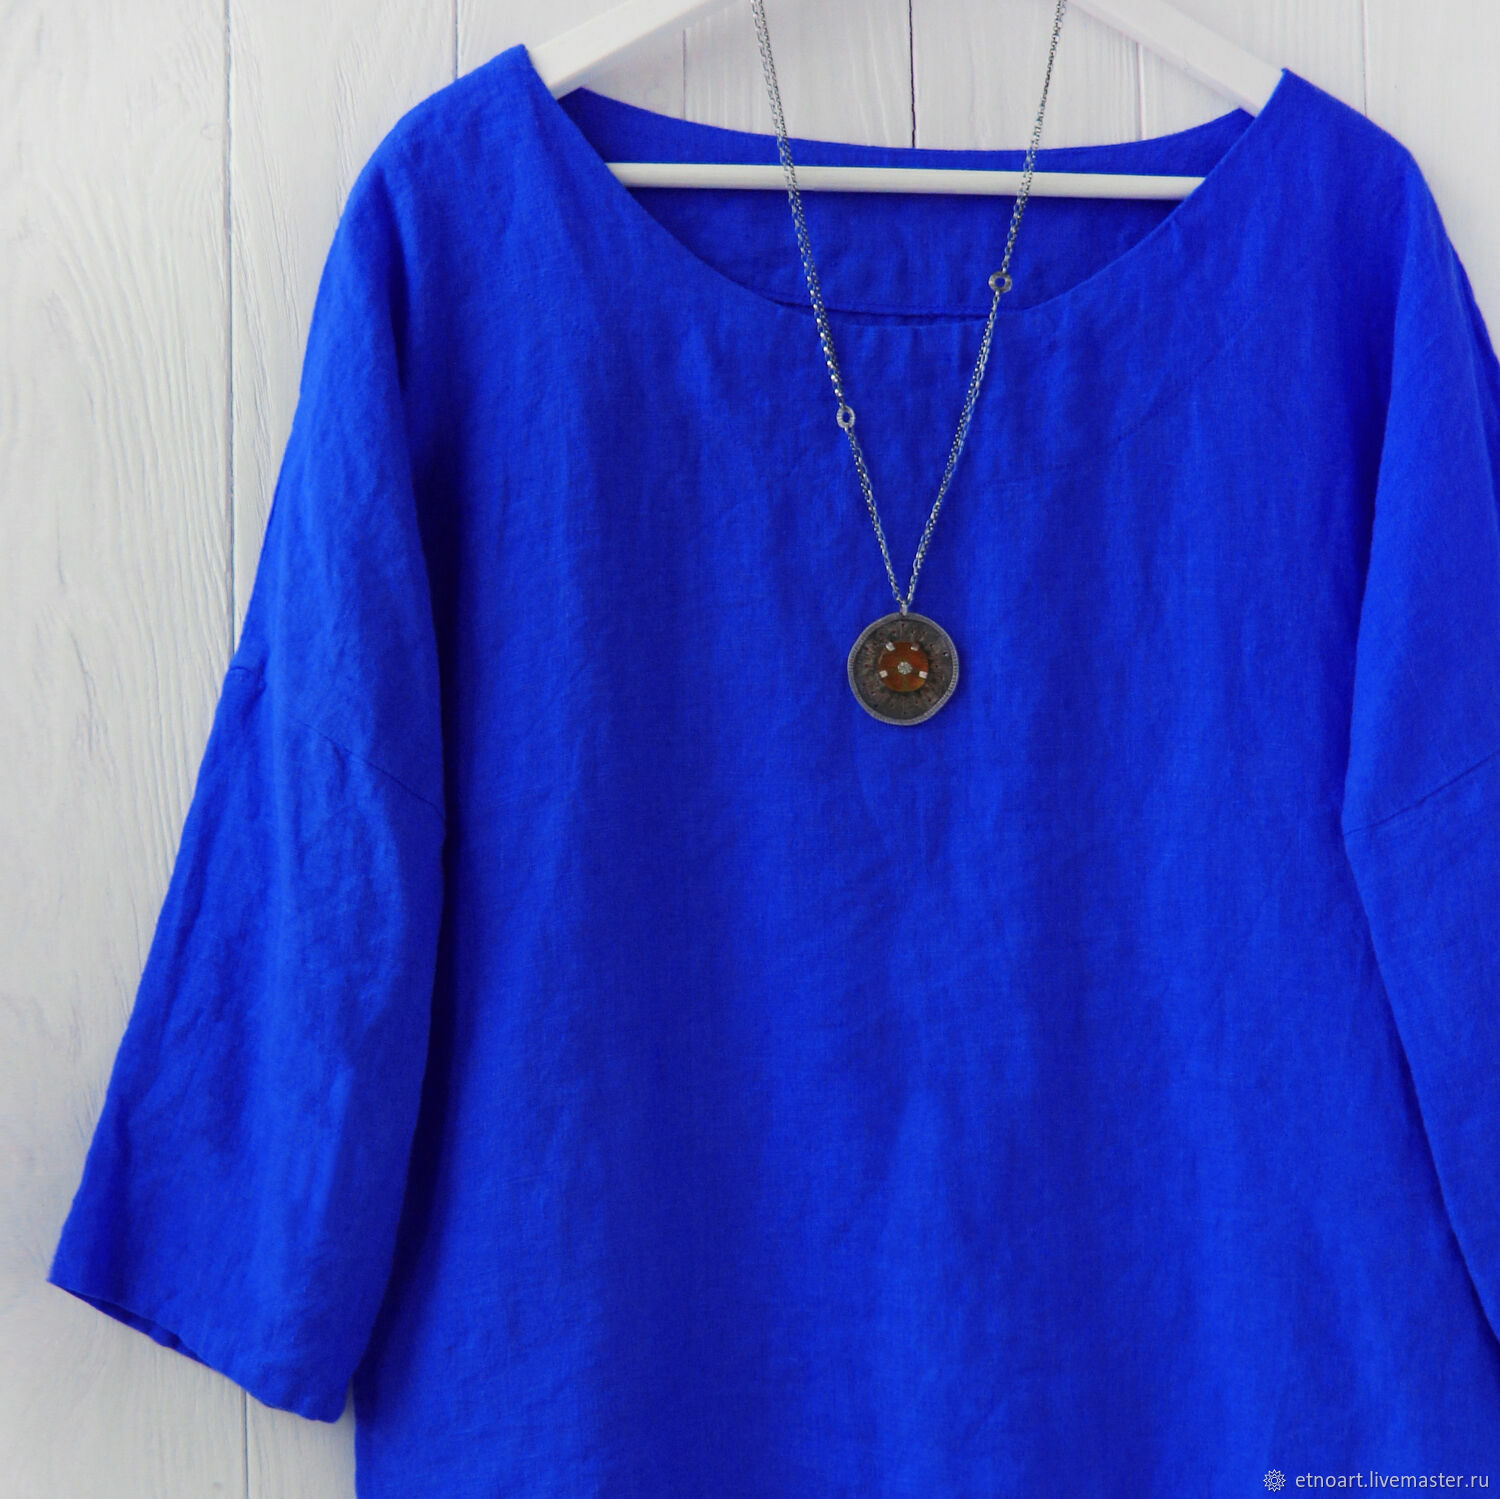 Oversize blouse made of bright blue linen, Blouses, Tomsk,  Фото №1